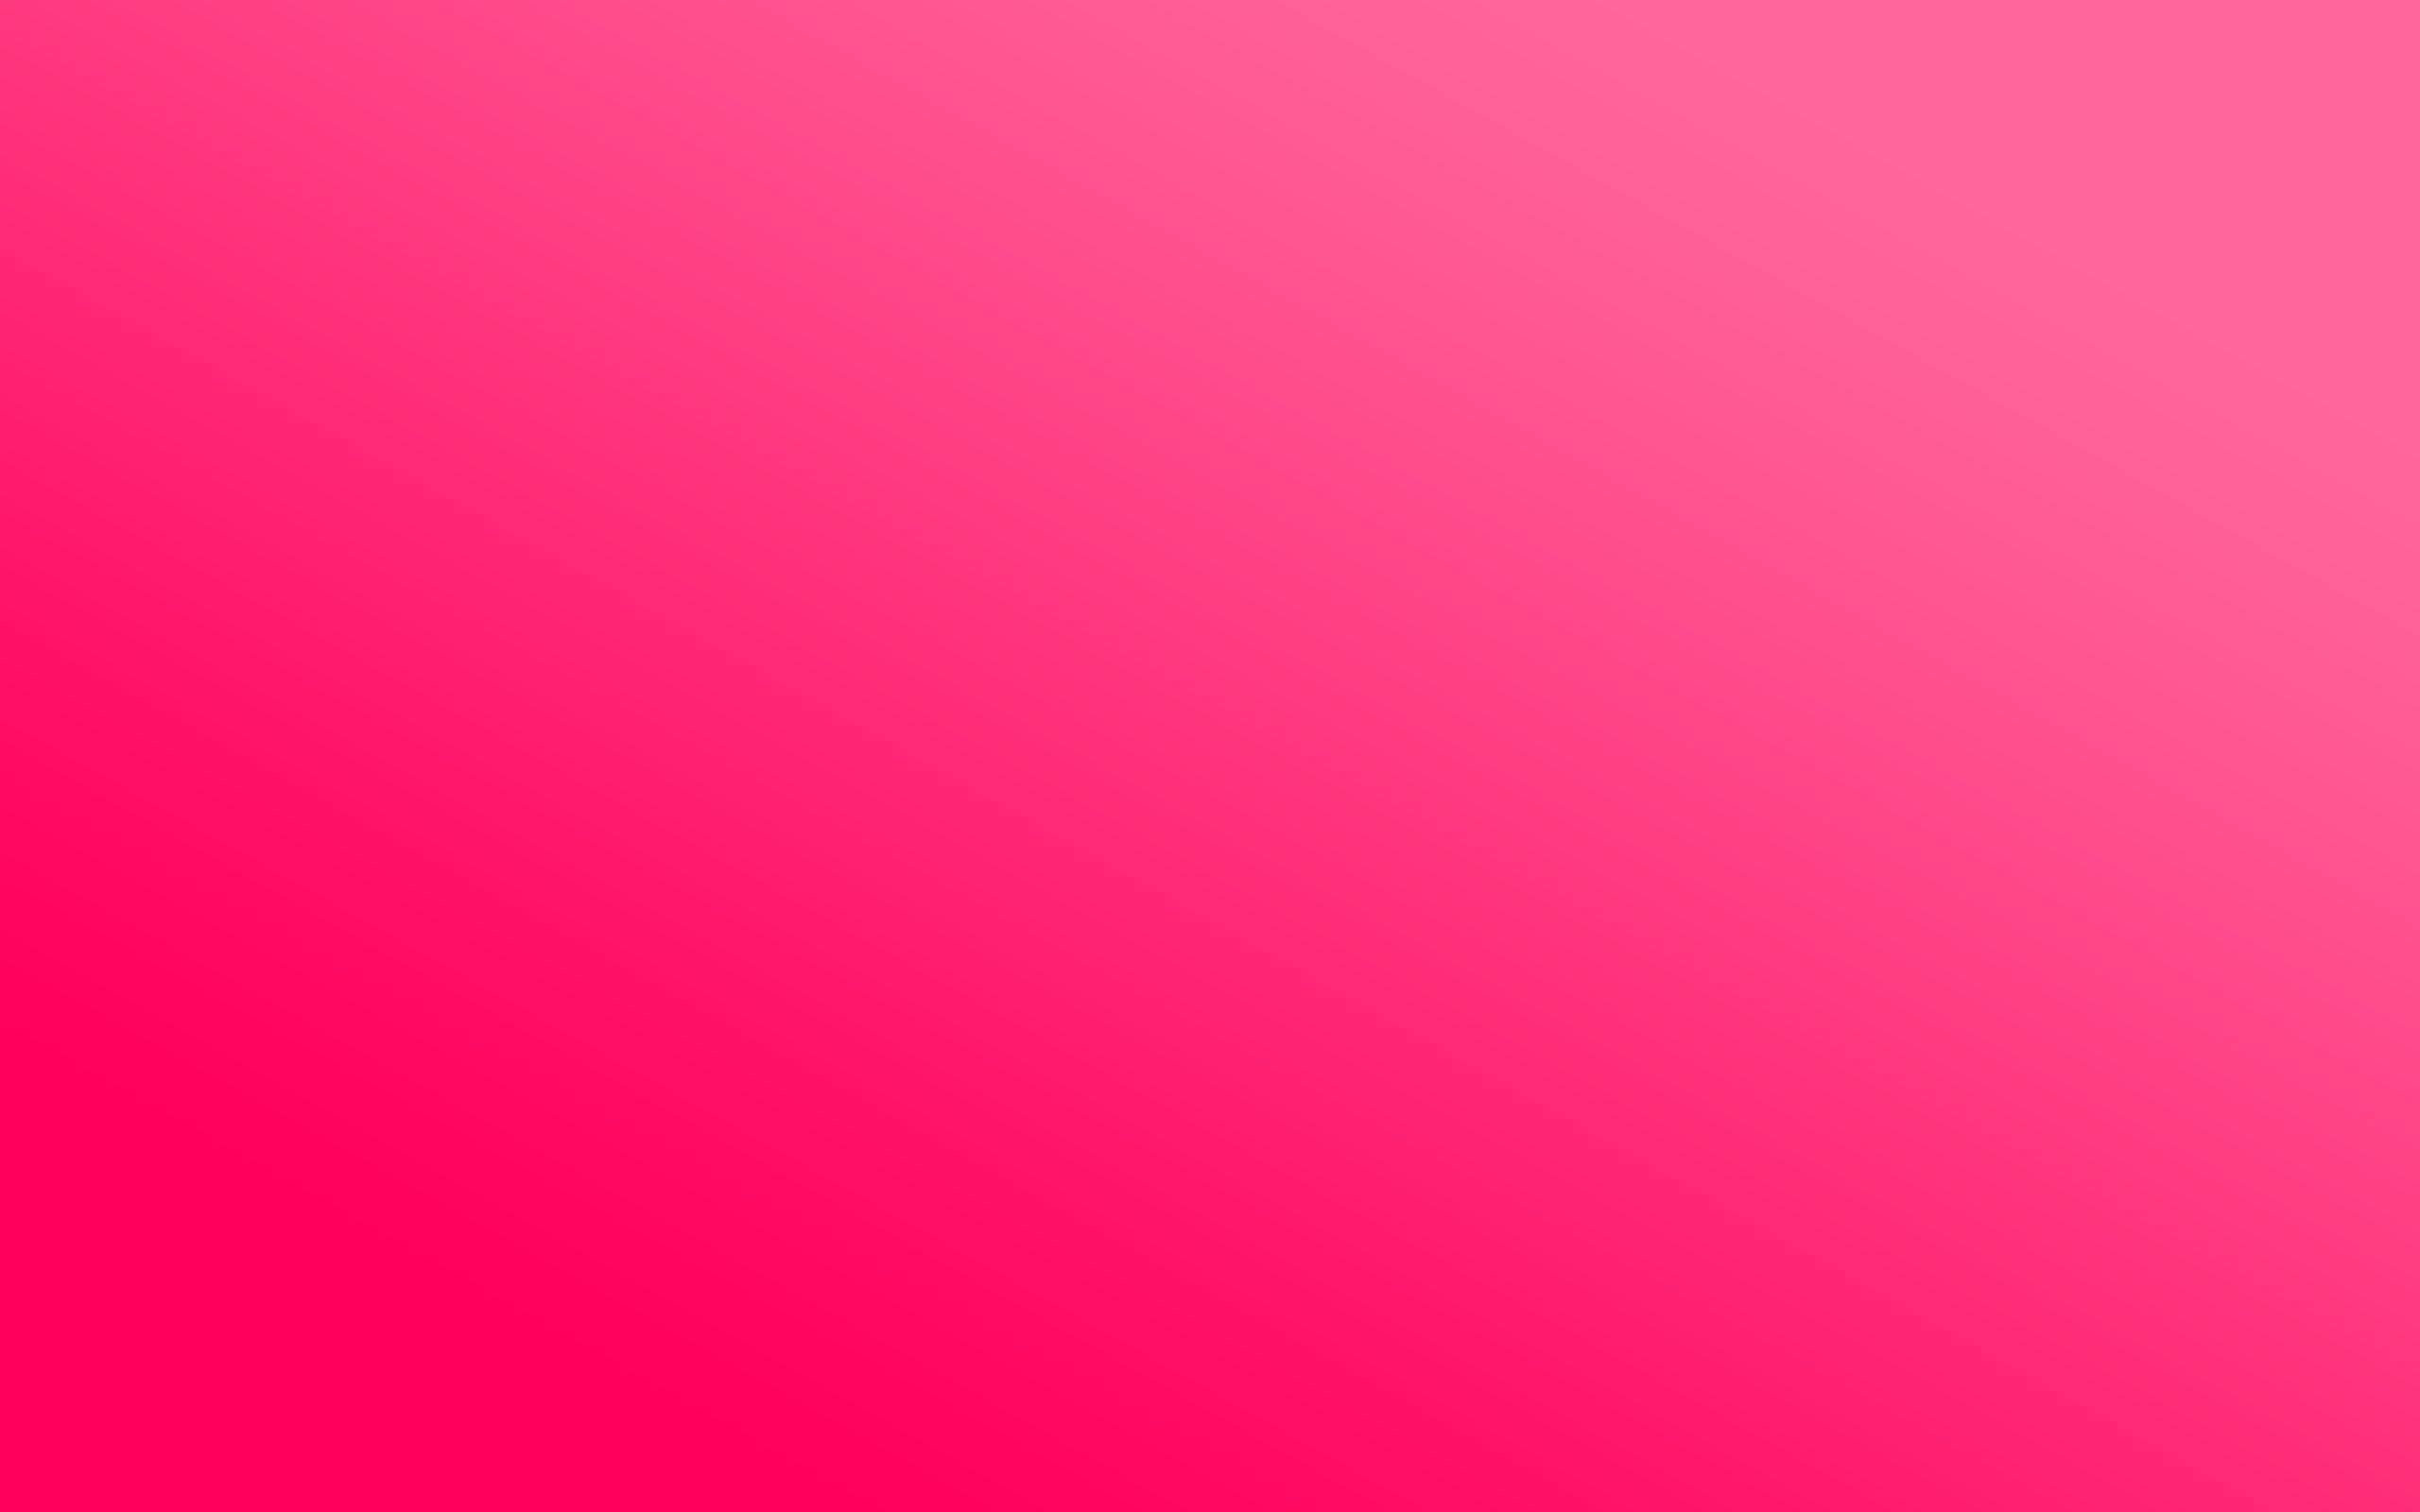 HD Background Dark Pink Solid Color Gradient Bright Light